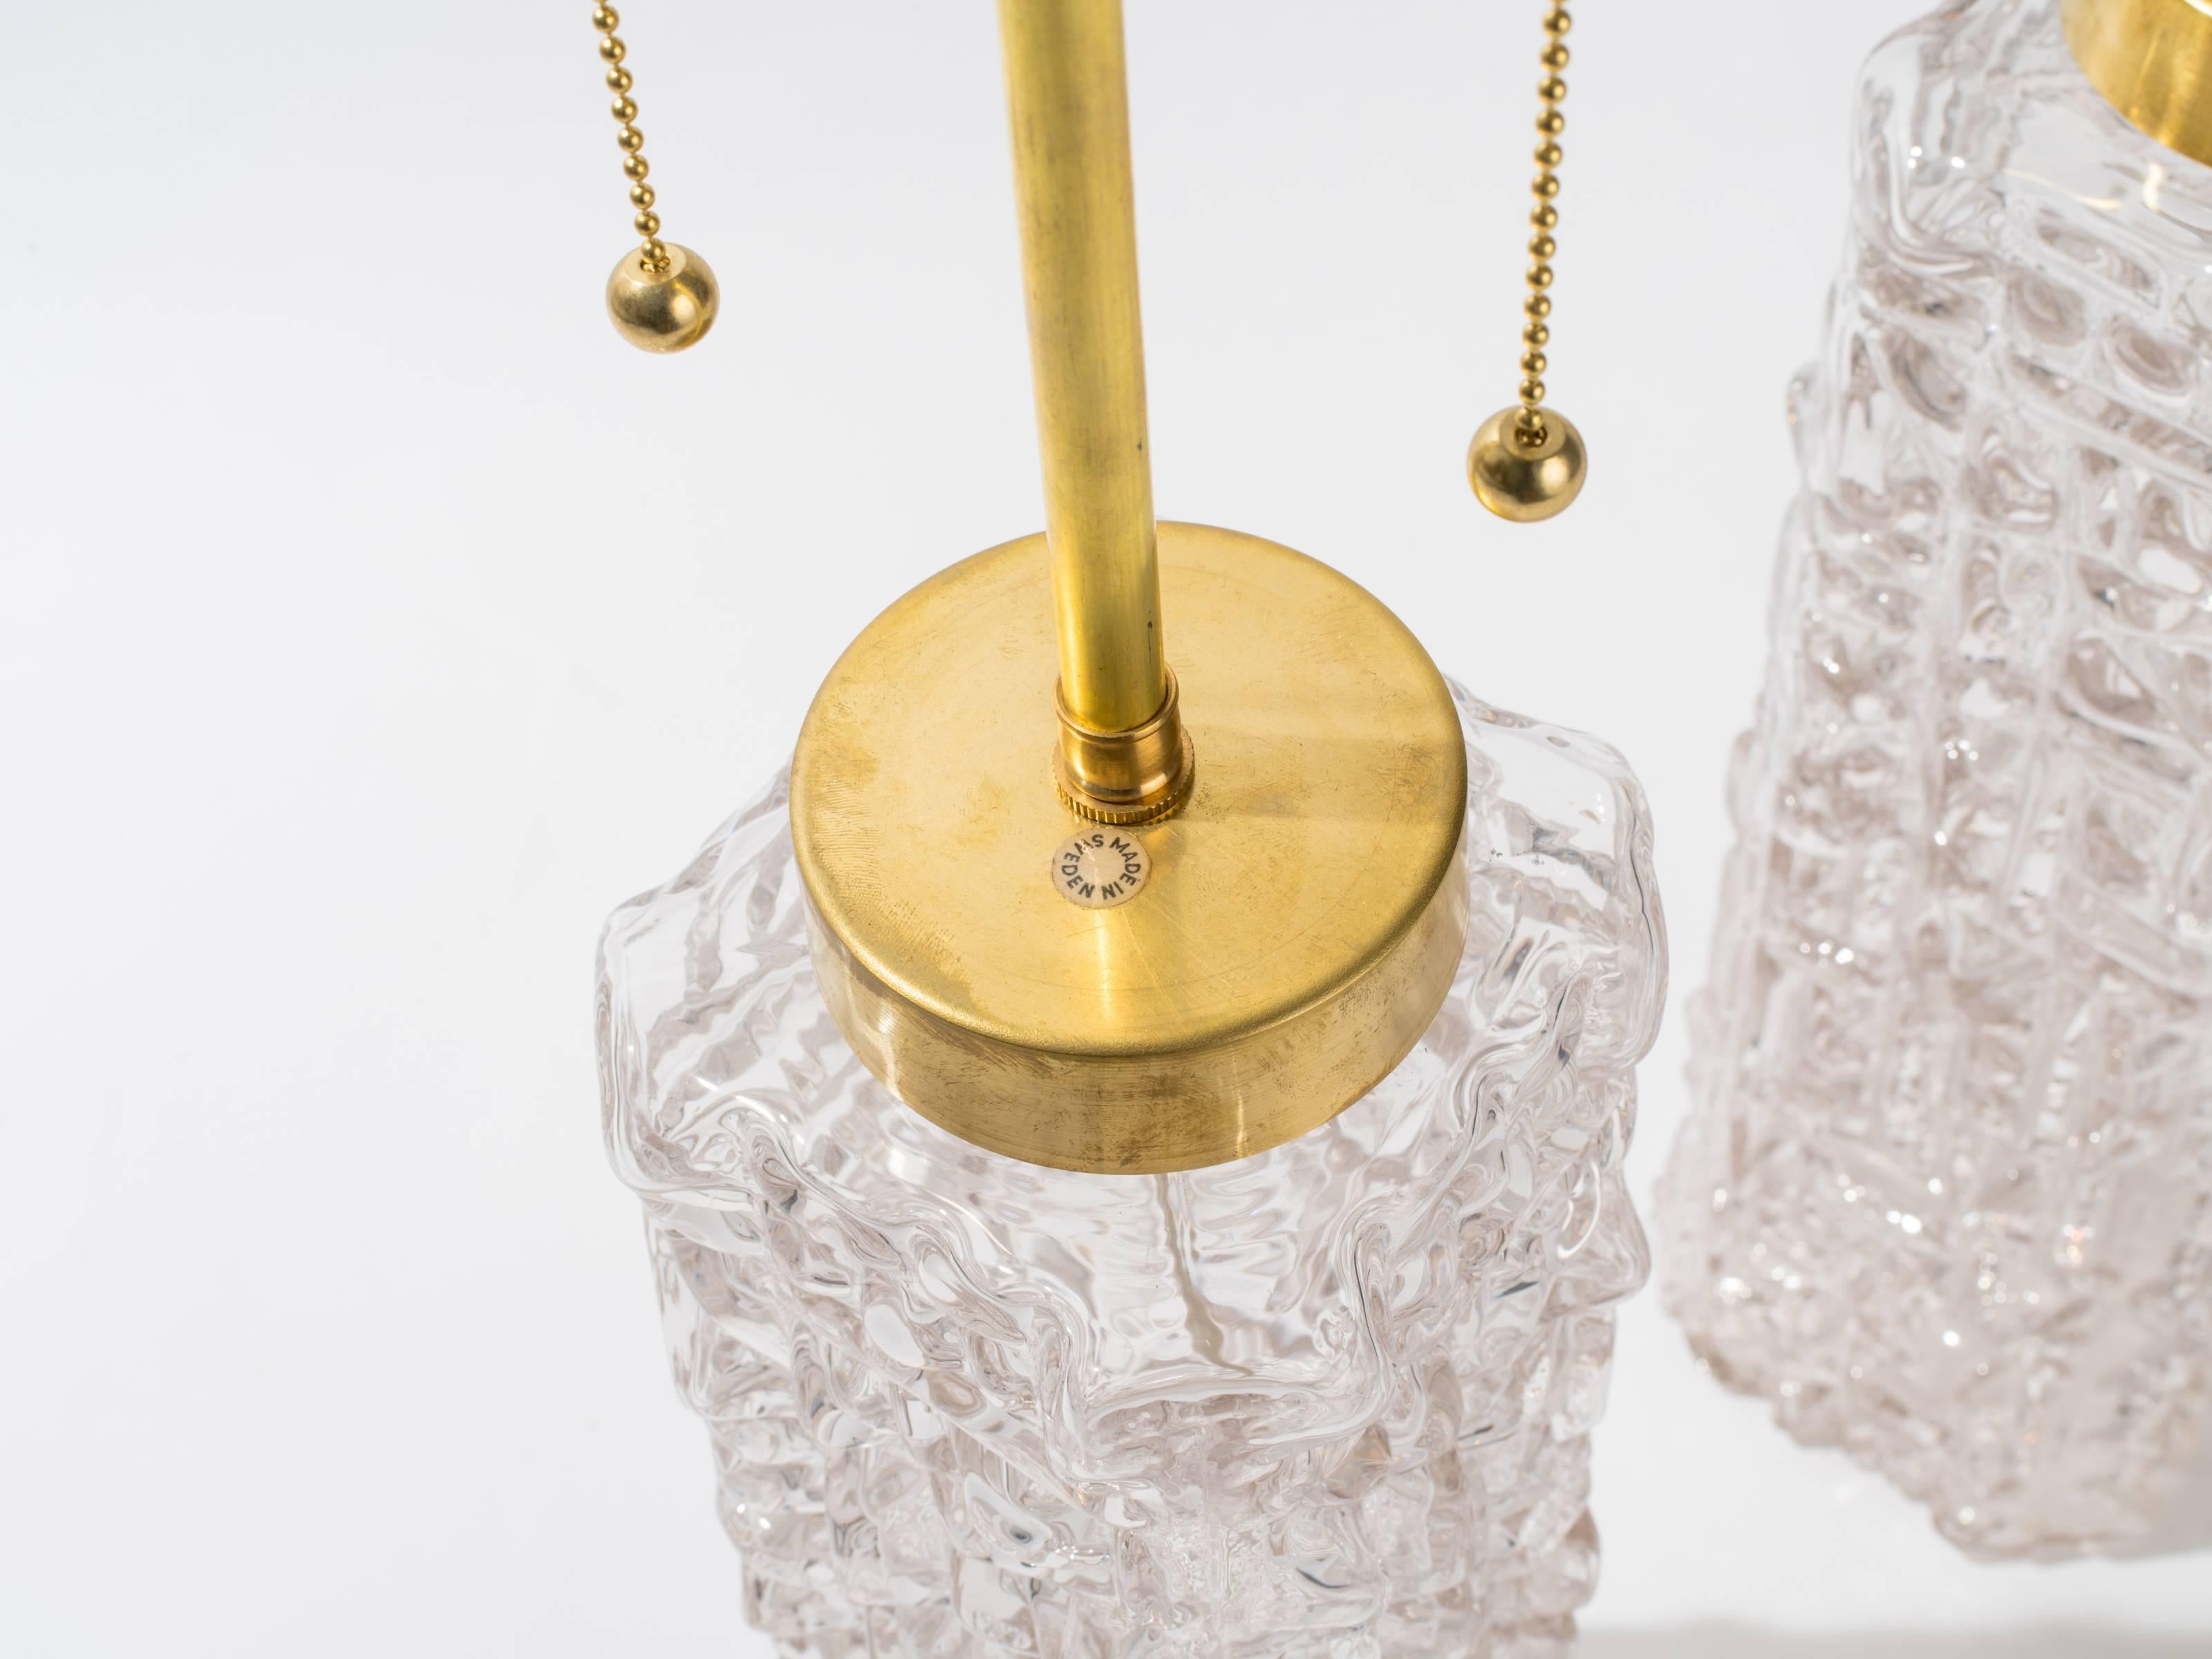 Unusual pair of molded glass table lamps by Carl Fagerlund.
Lamps were professionally restored with new brass caps and double pull chain socket. Newly wired.